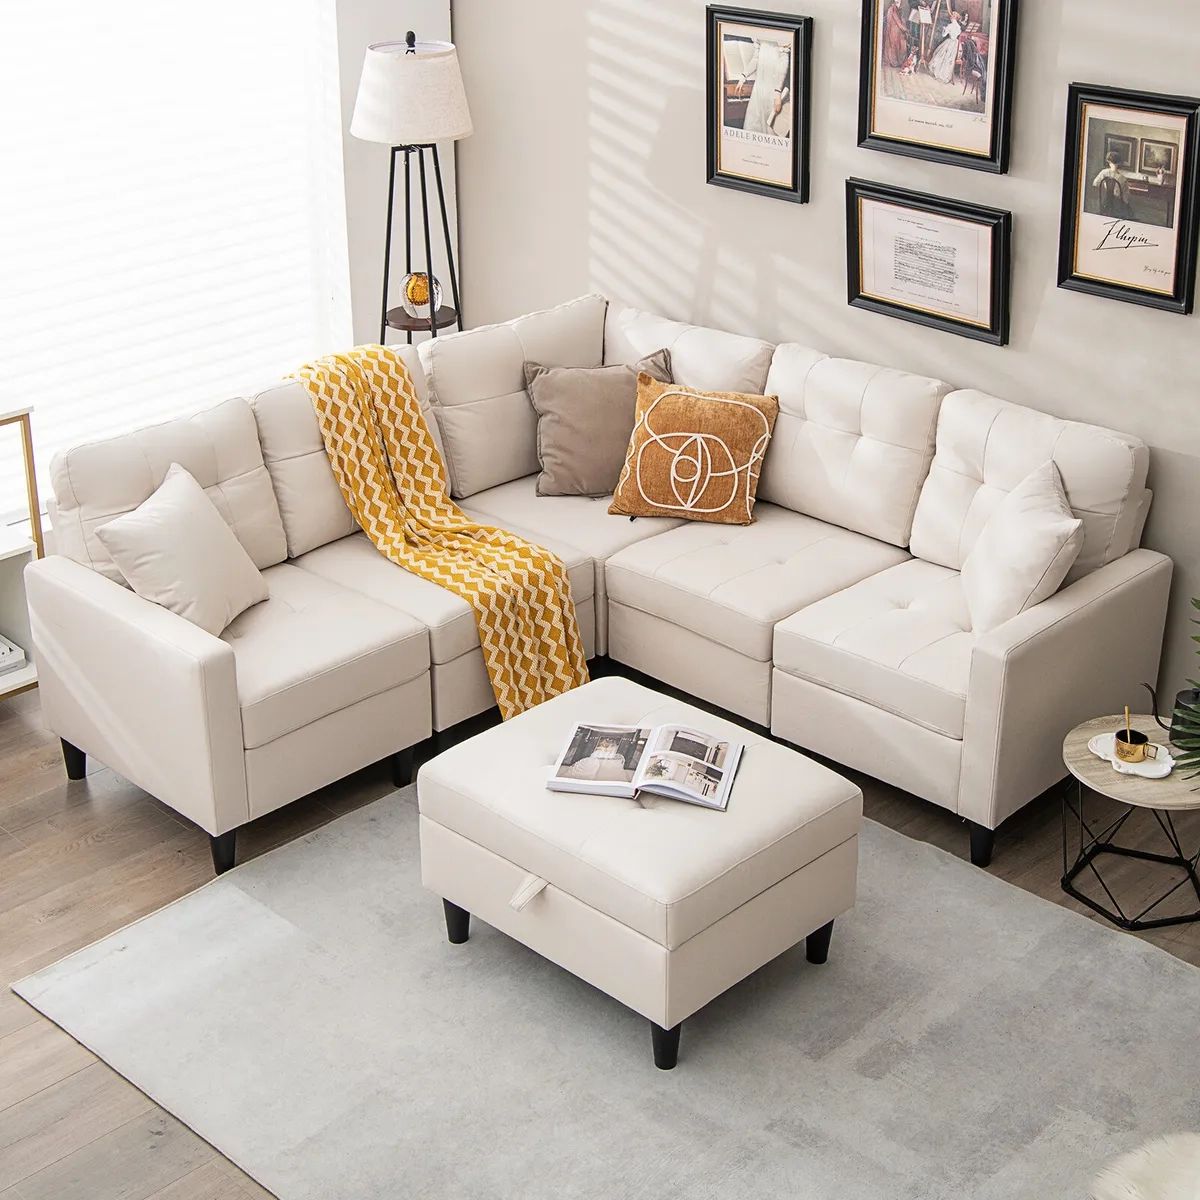 L Shaped Sectional Corner Sofa Set W/ Removable Ottoman & Seat Cushions  Beige | Ebay Regarding Beige L Shaped Sectional Sofas (View 3 of 15)